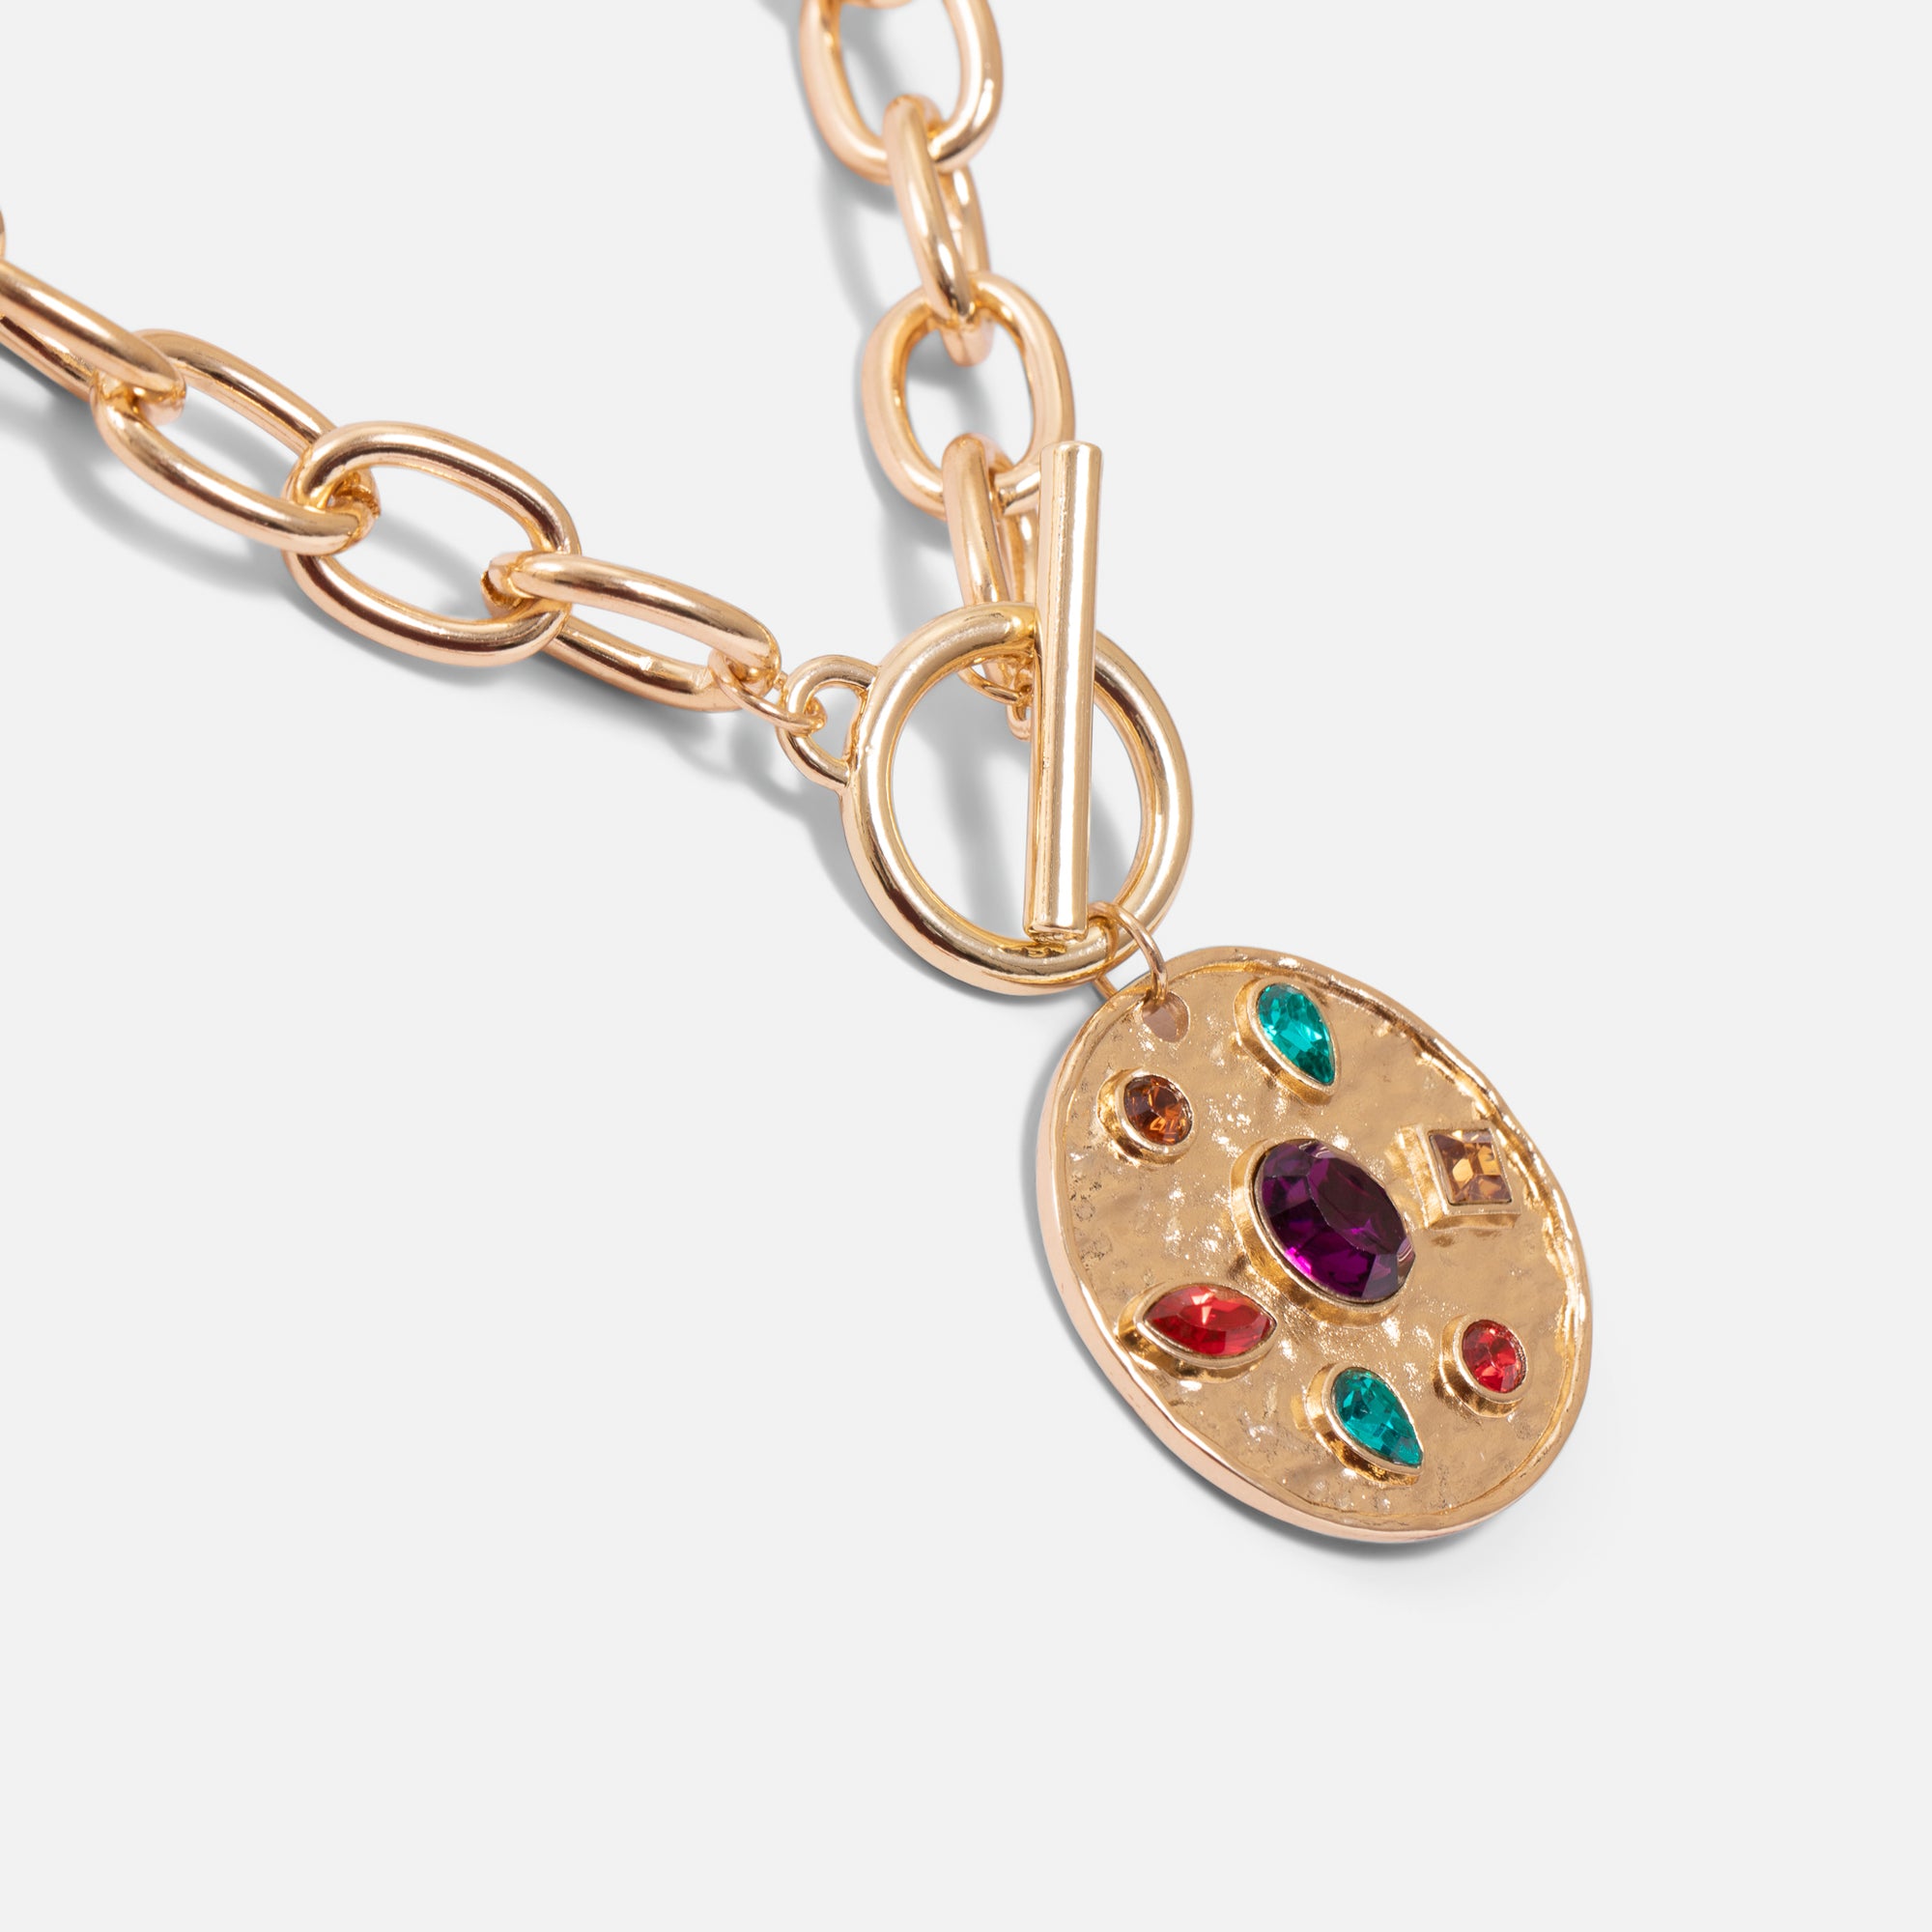 Multicolored gold necklace and glittering stones